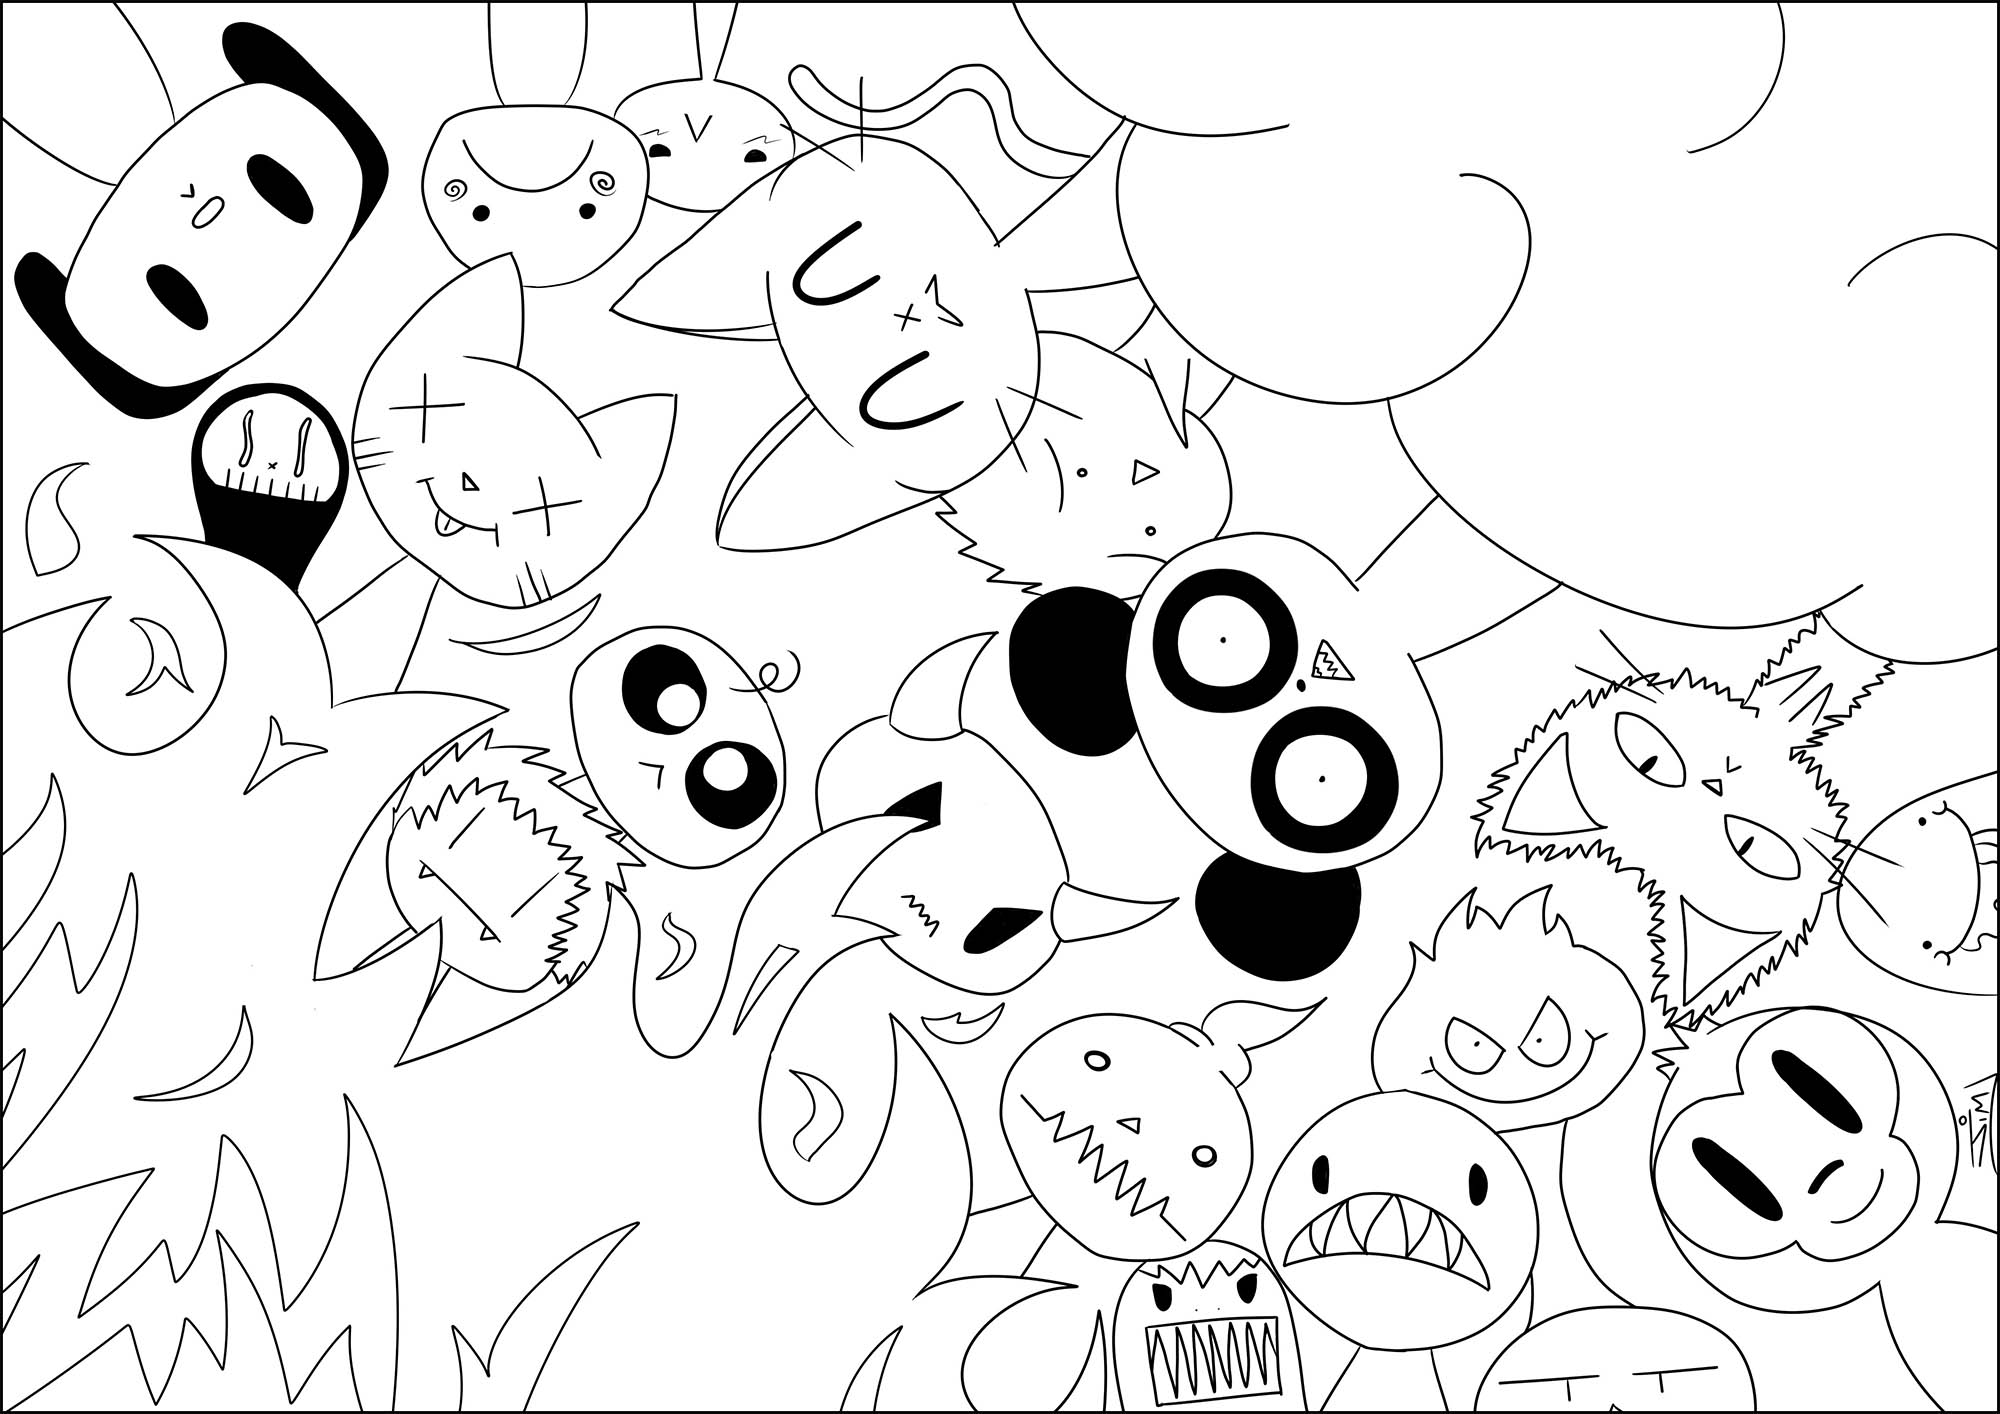 Beautiful Doodle Art coloring page to print and color